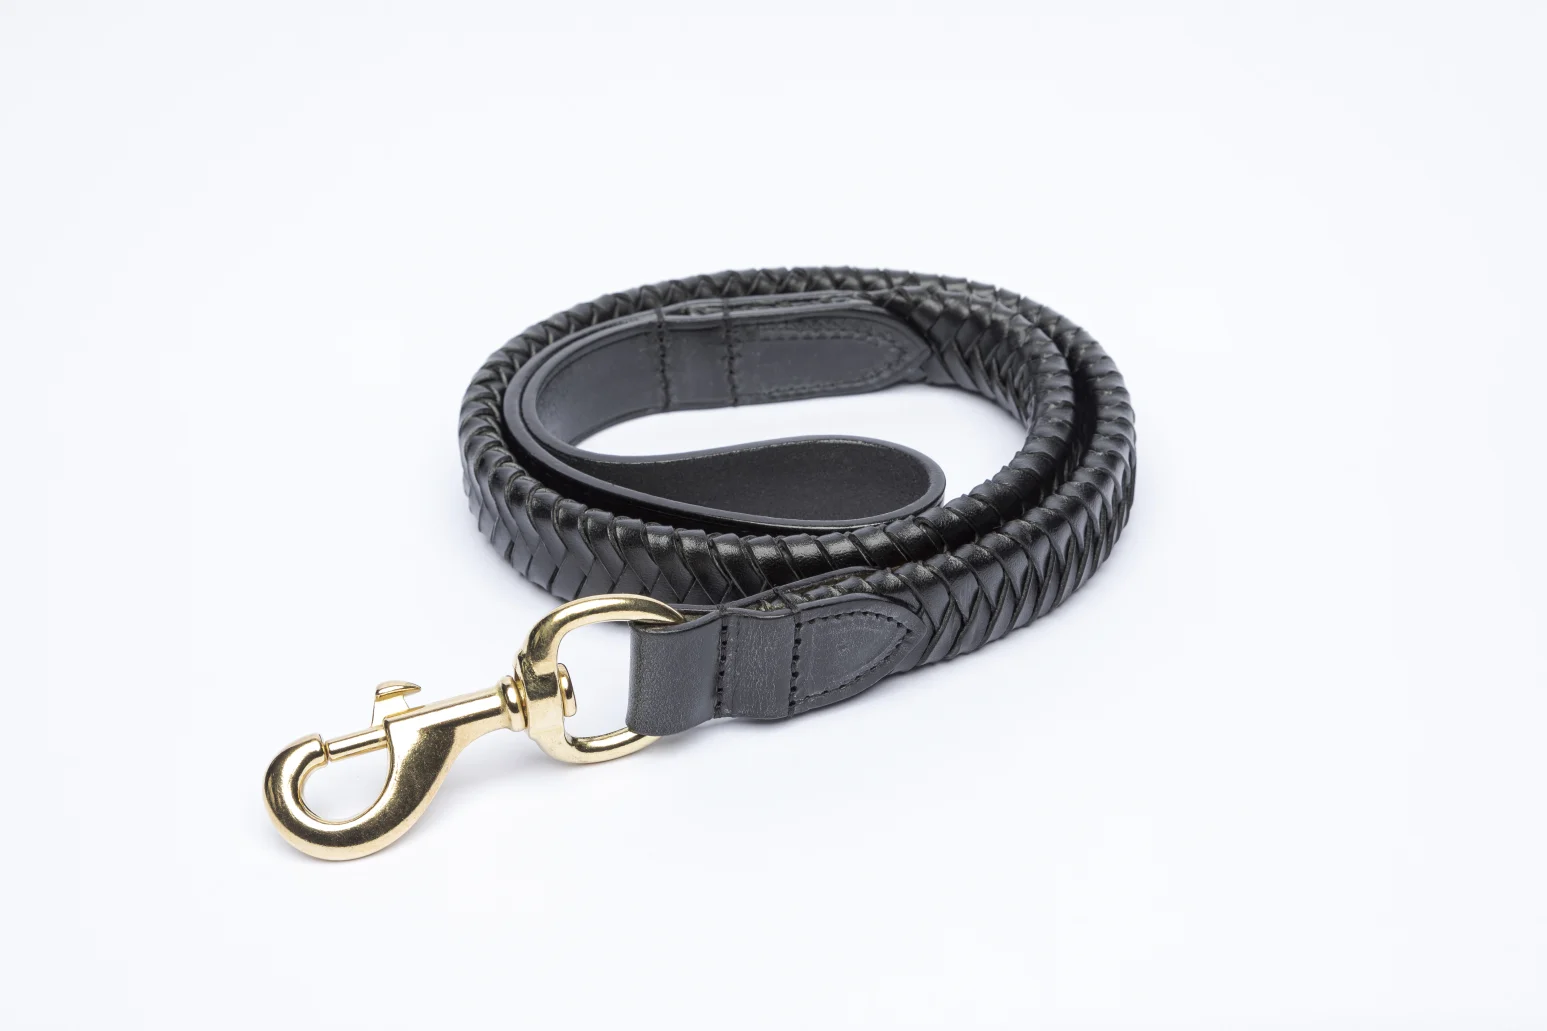 Plaited Dog Lead in Vegetable Tan Leather in Black